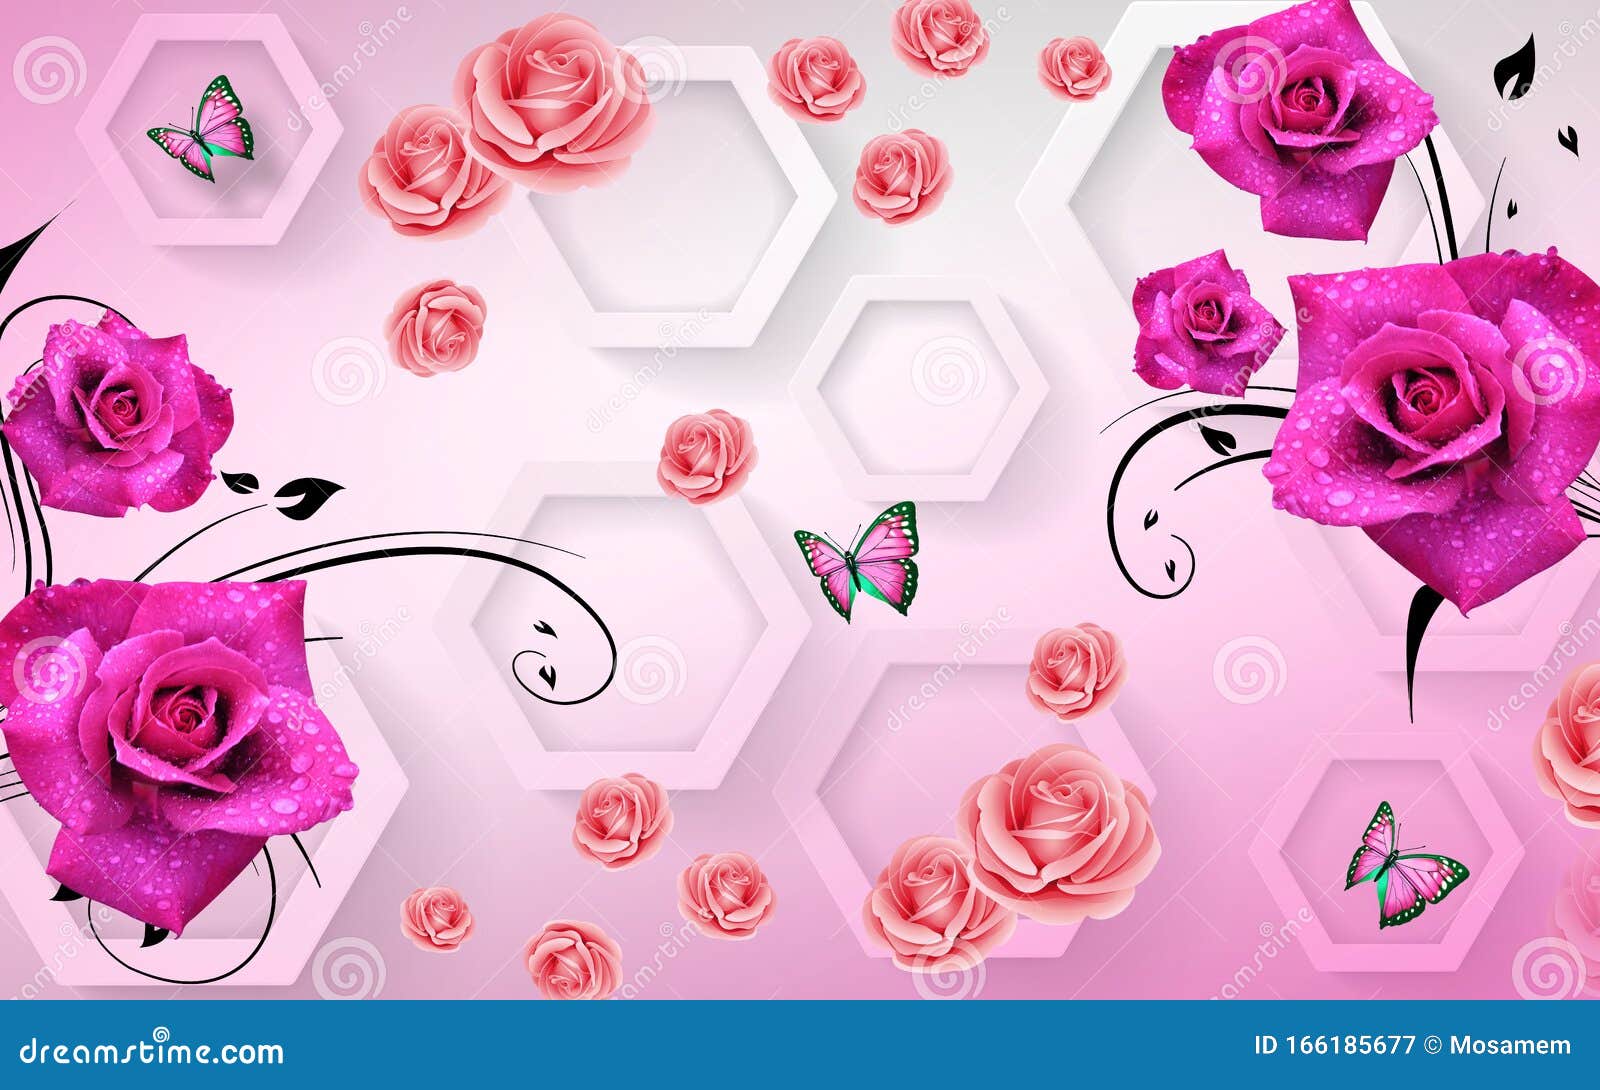 3d mural wallpapers with flowers orchids and waving butterflies on 3d rendering rose background will visually expand the space in